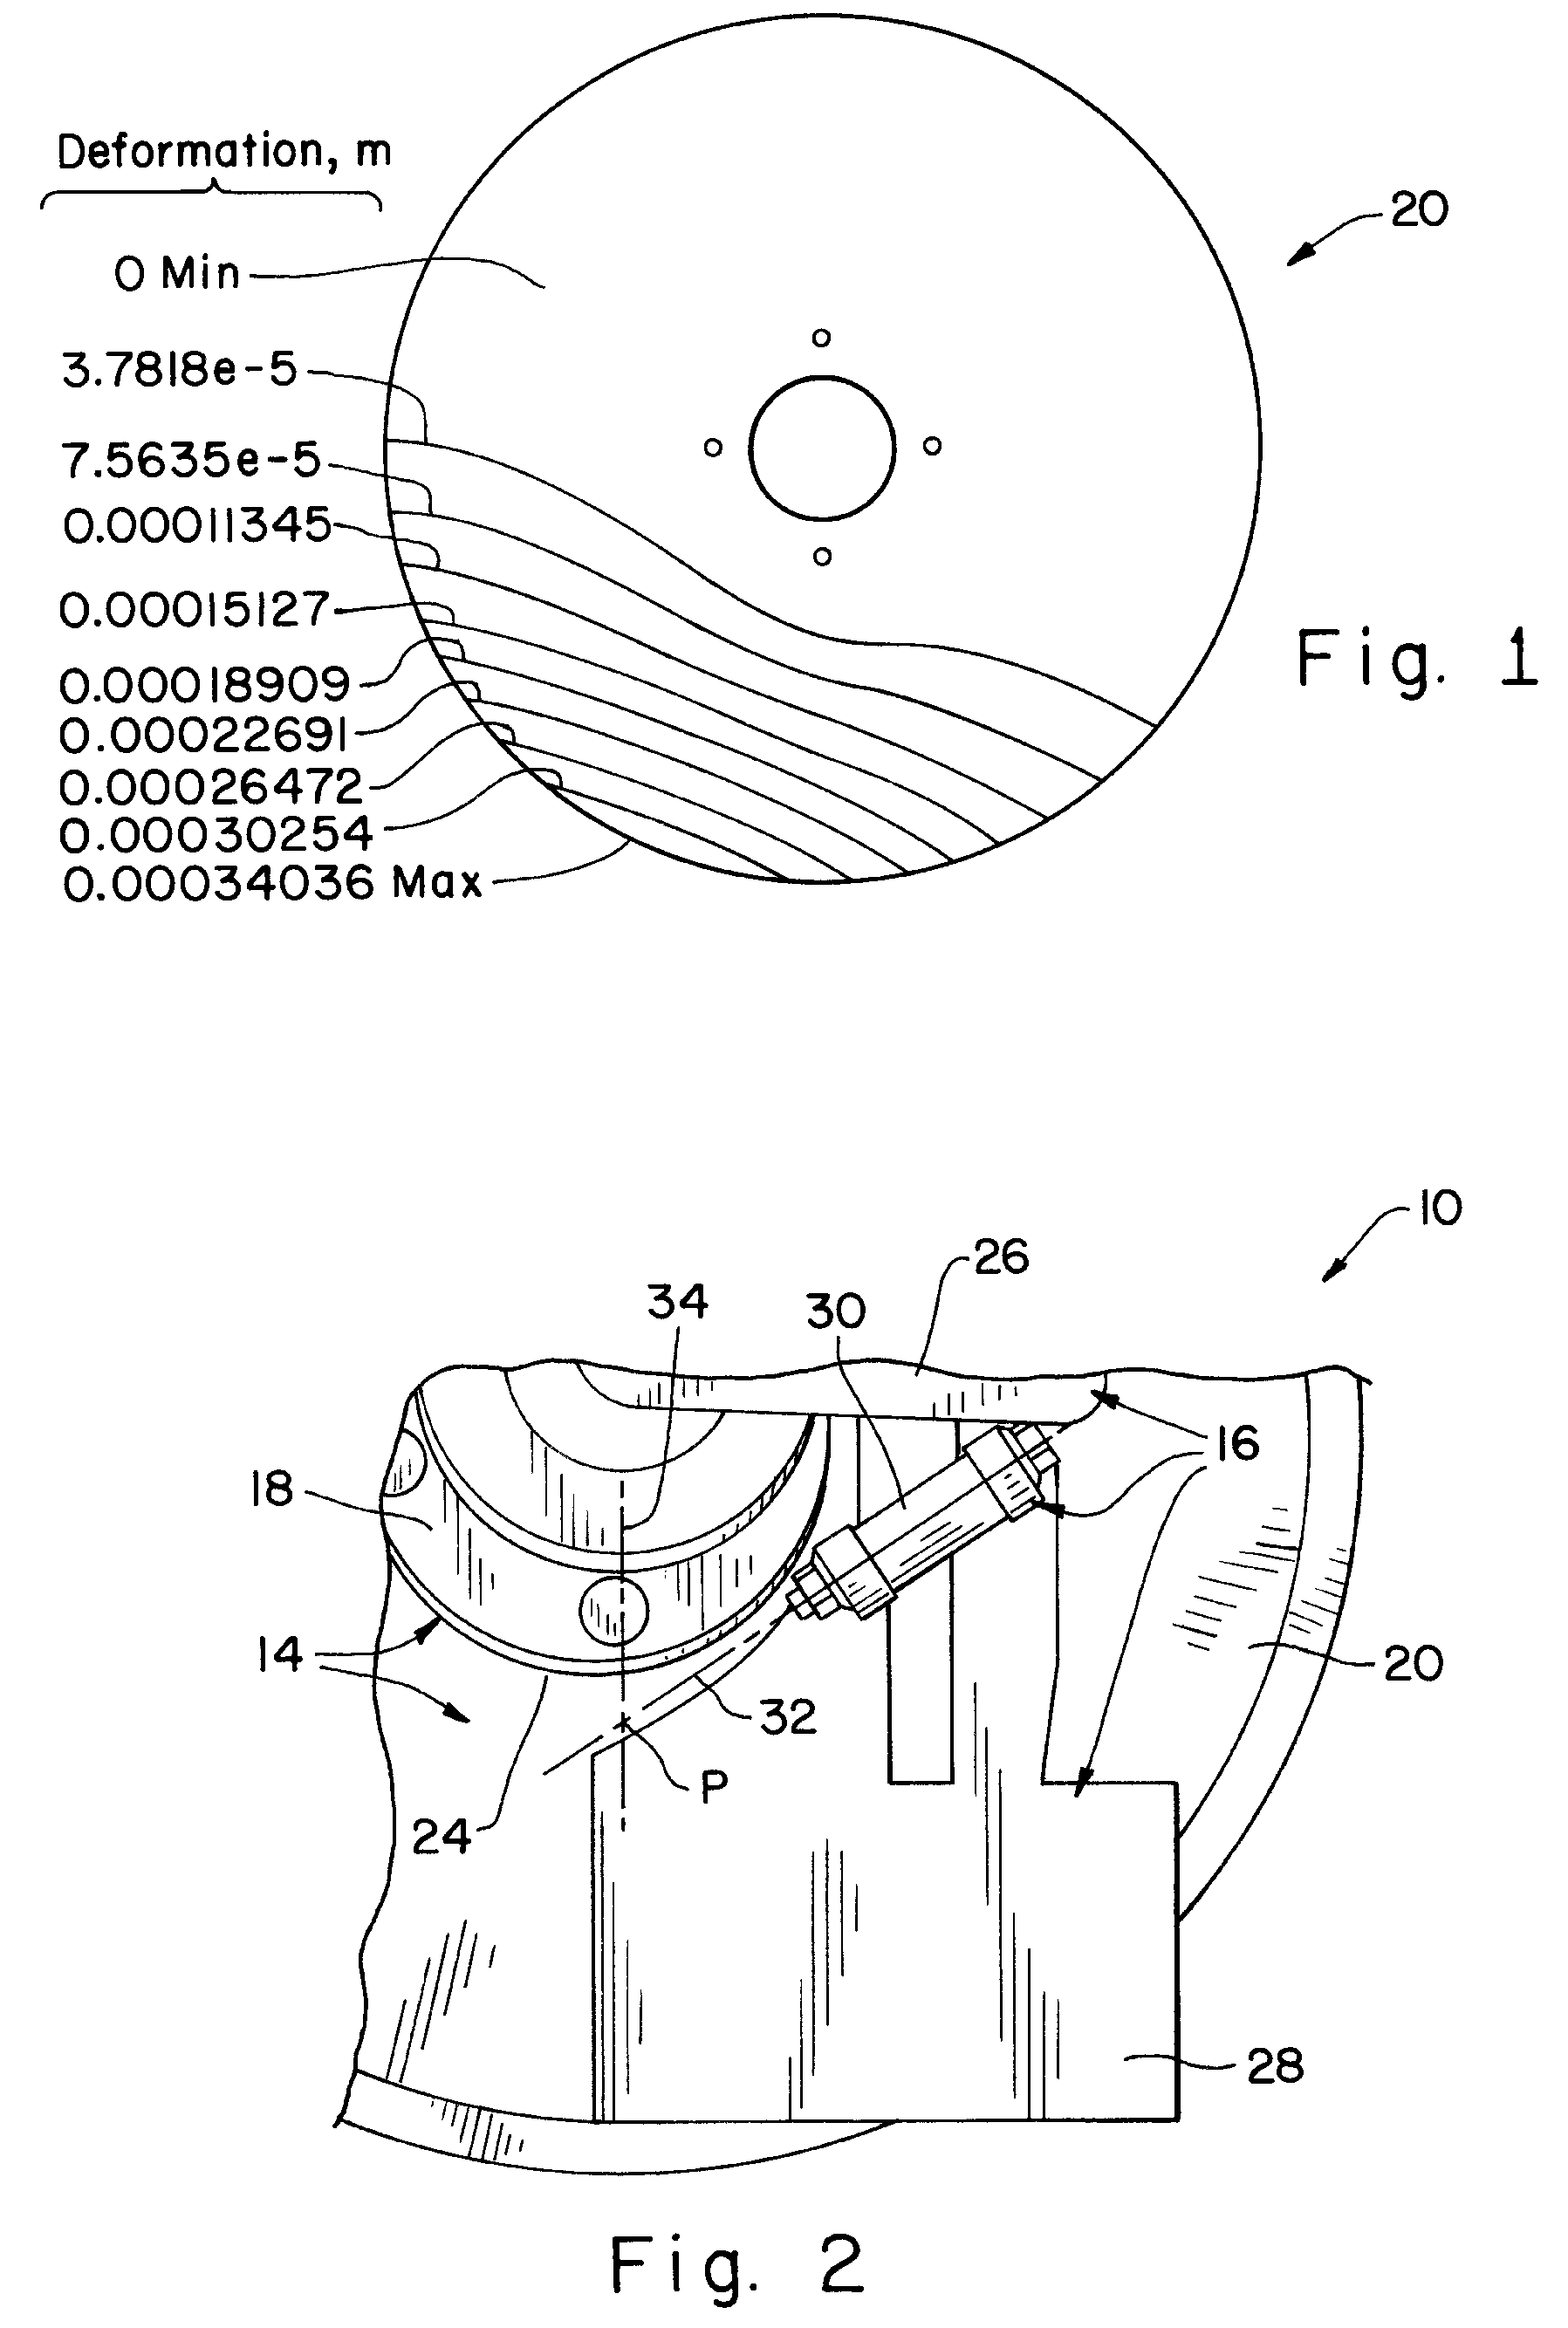 Opener disk blade scraper hinge geometry to maintain contact with deflected disk blade